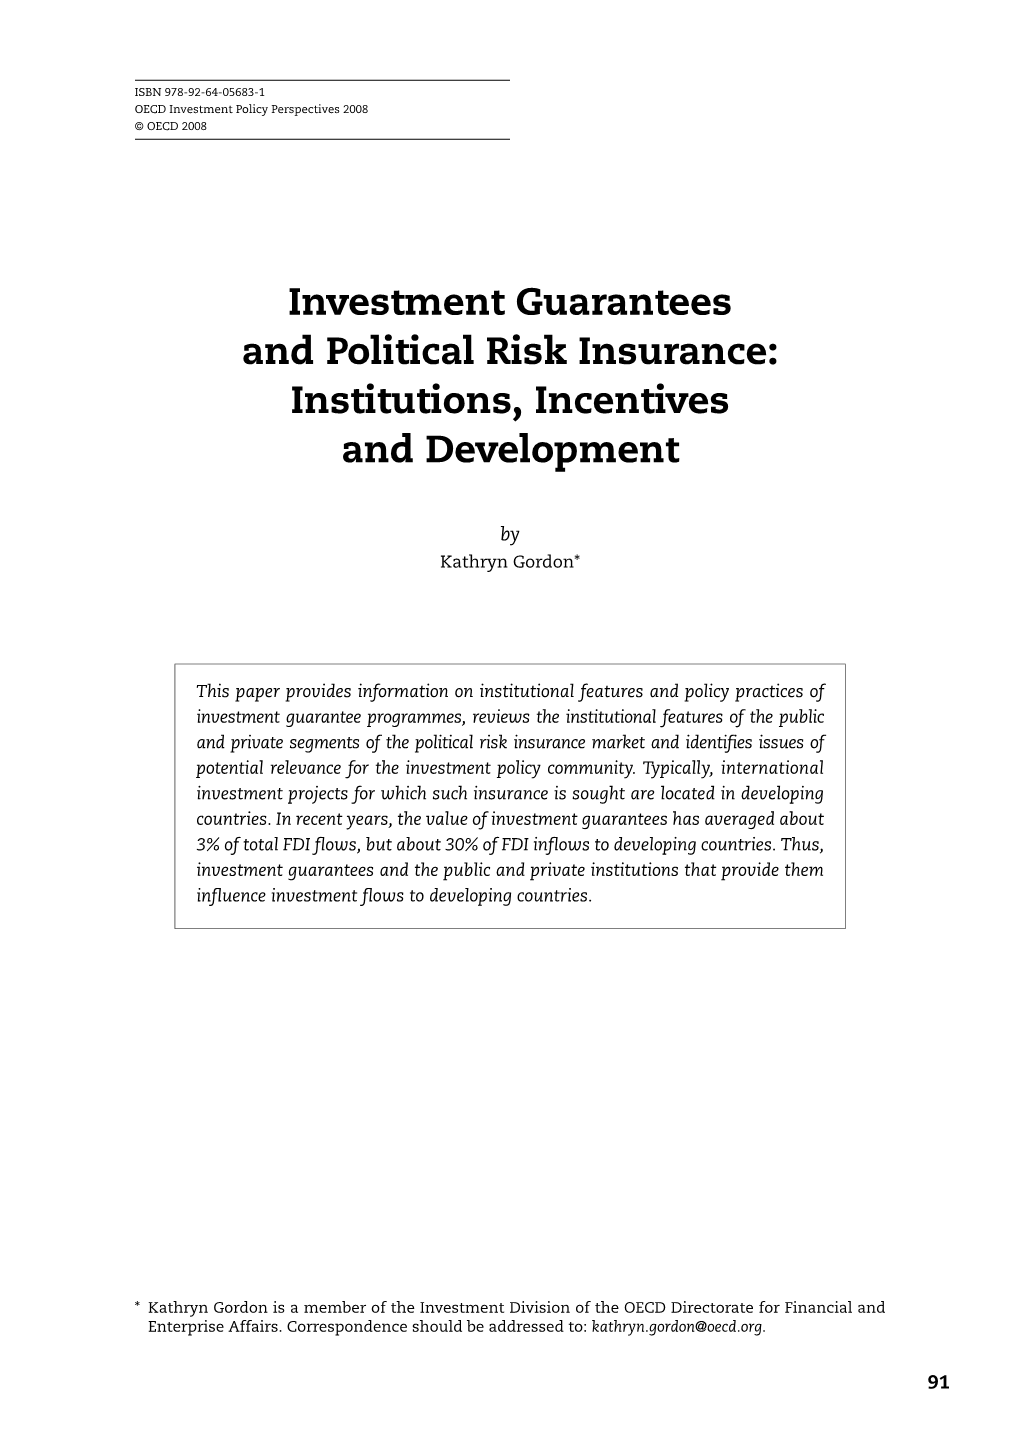 Investment Guarantees and Political Risk Insurance: Institutions, Incentives and Development